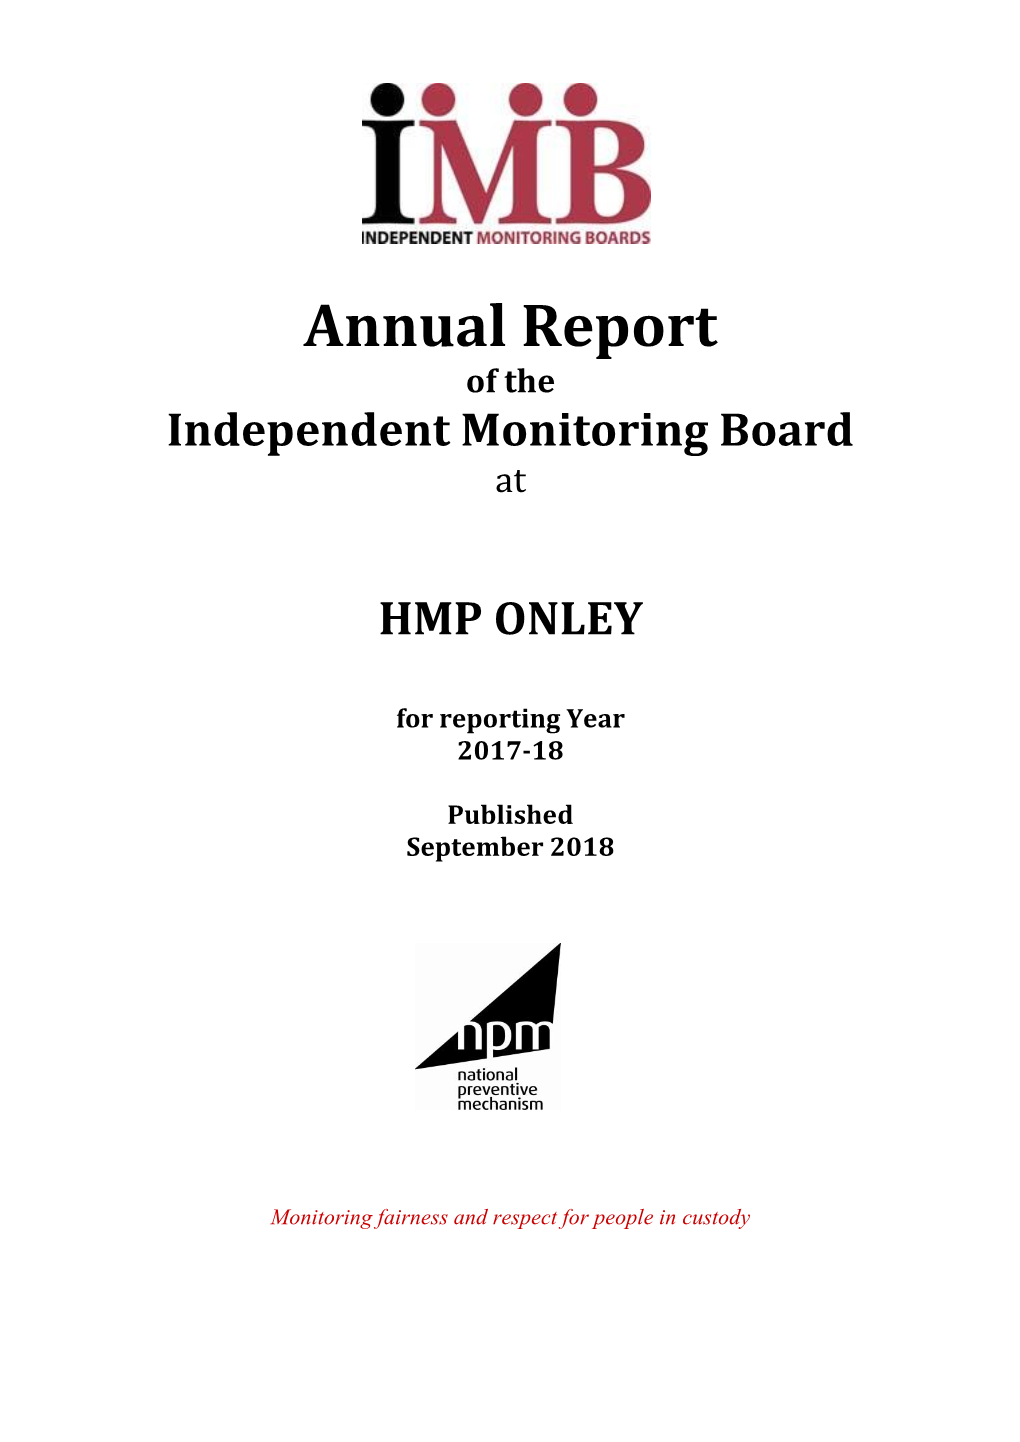 HMP ONLEY for Reporting Year 2017-18 Published September 2018